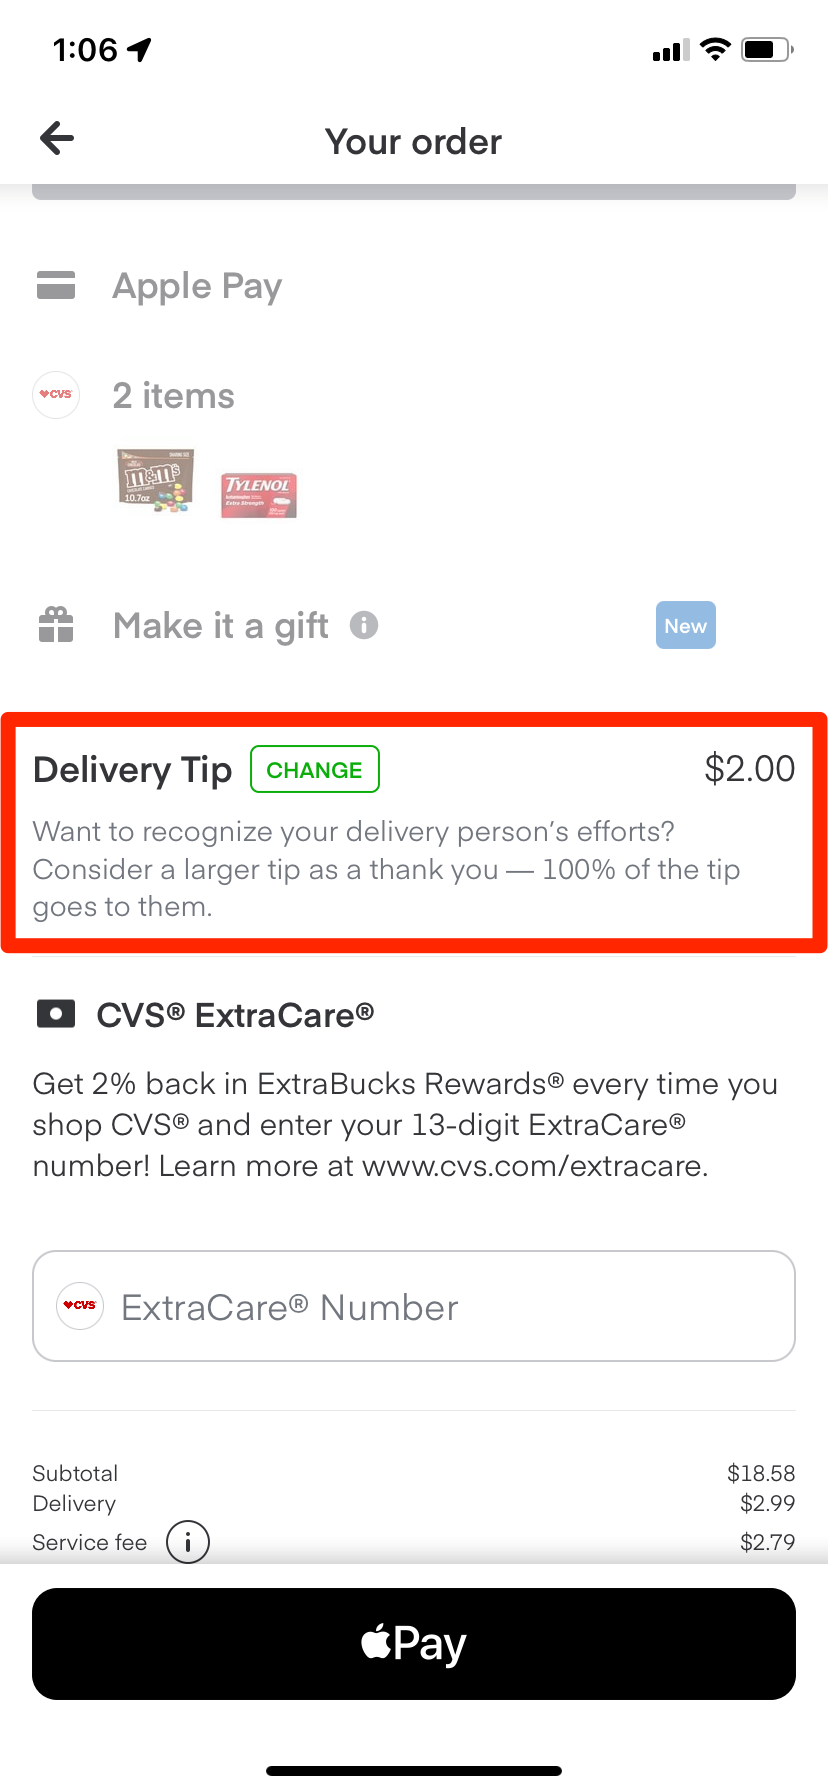 The Delivery Tip option in the Instacart app.